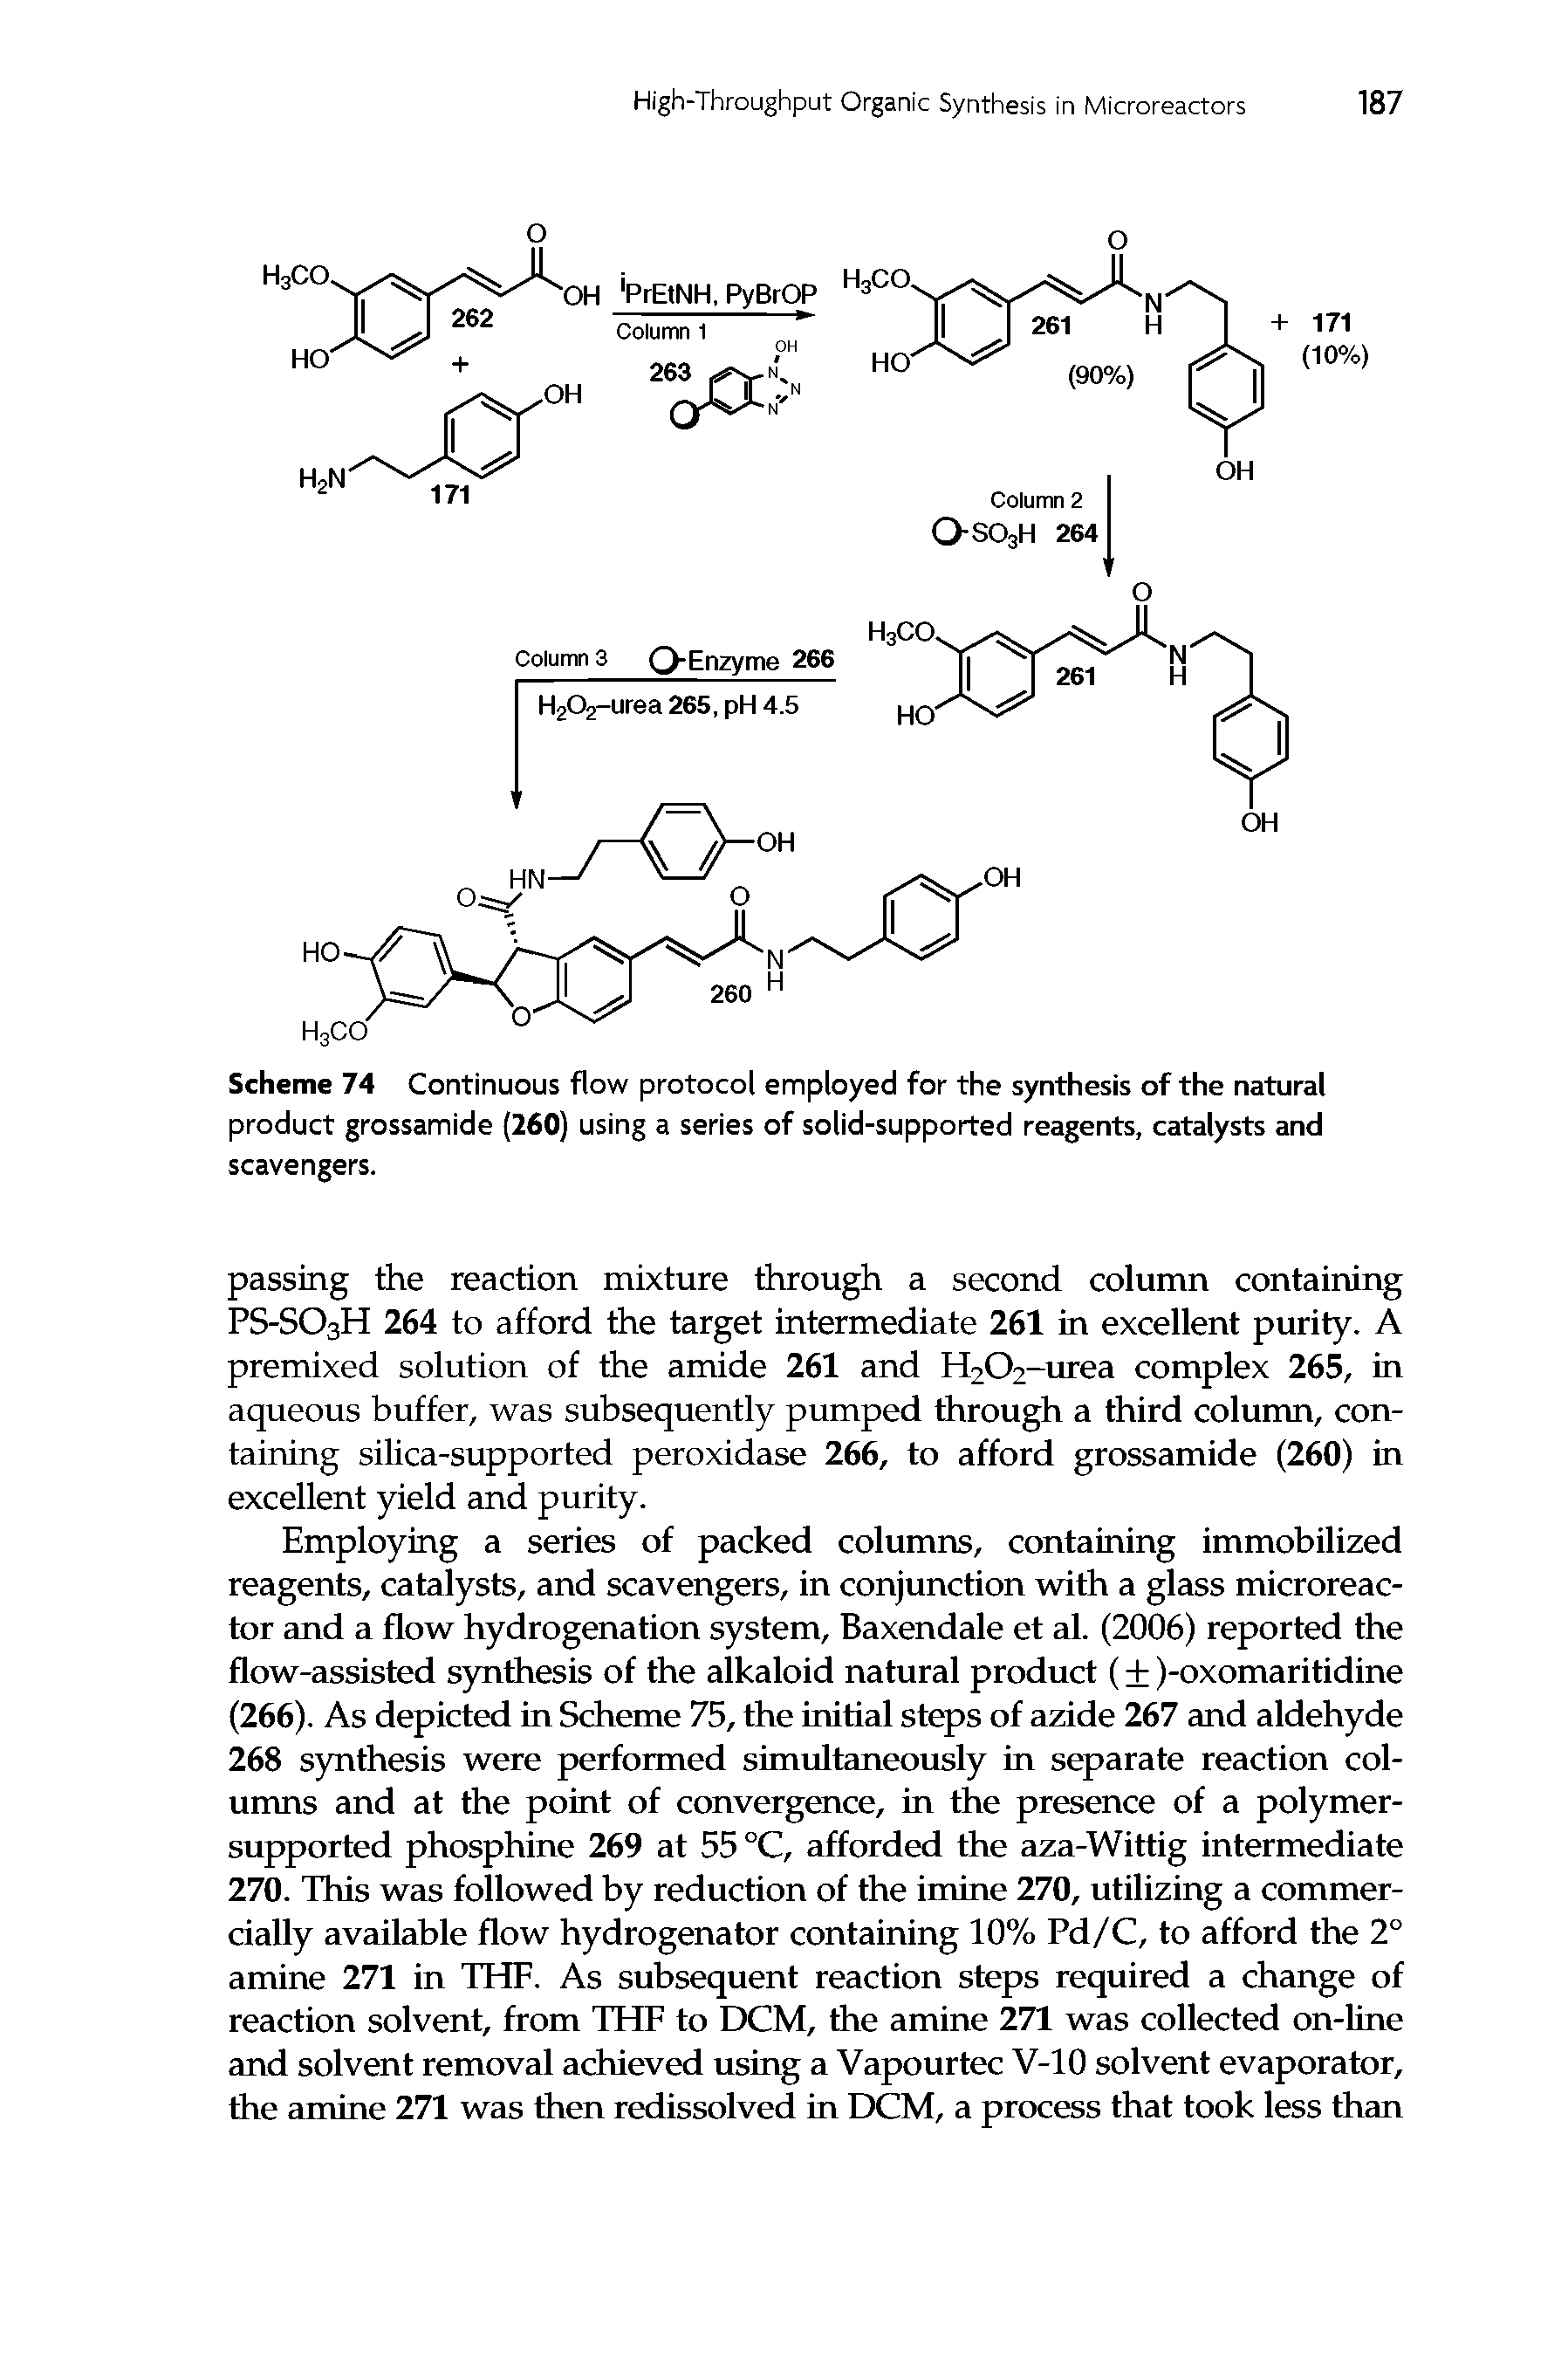 Scheme 74 Continuous flow protocol employed for the synthesis of the natural product grossamide (260) using a series of solid-supported reagents, catalysts and scavengers.